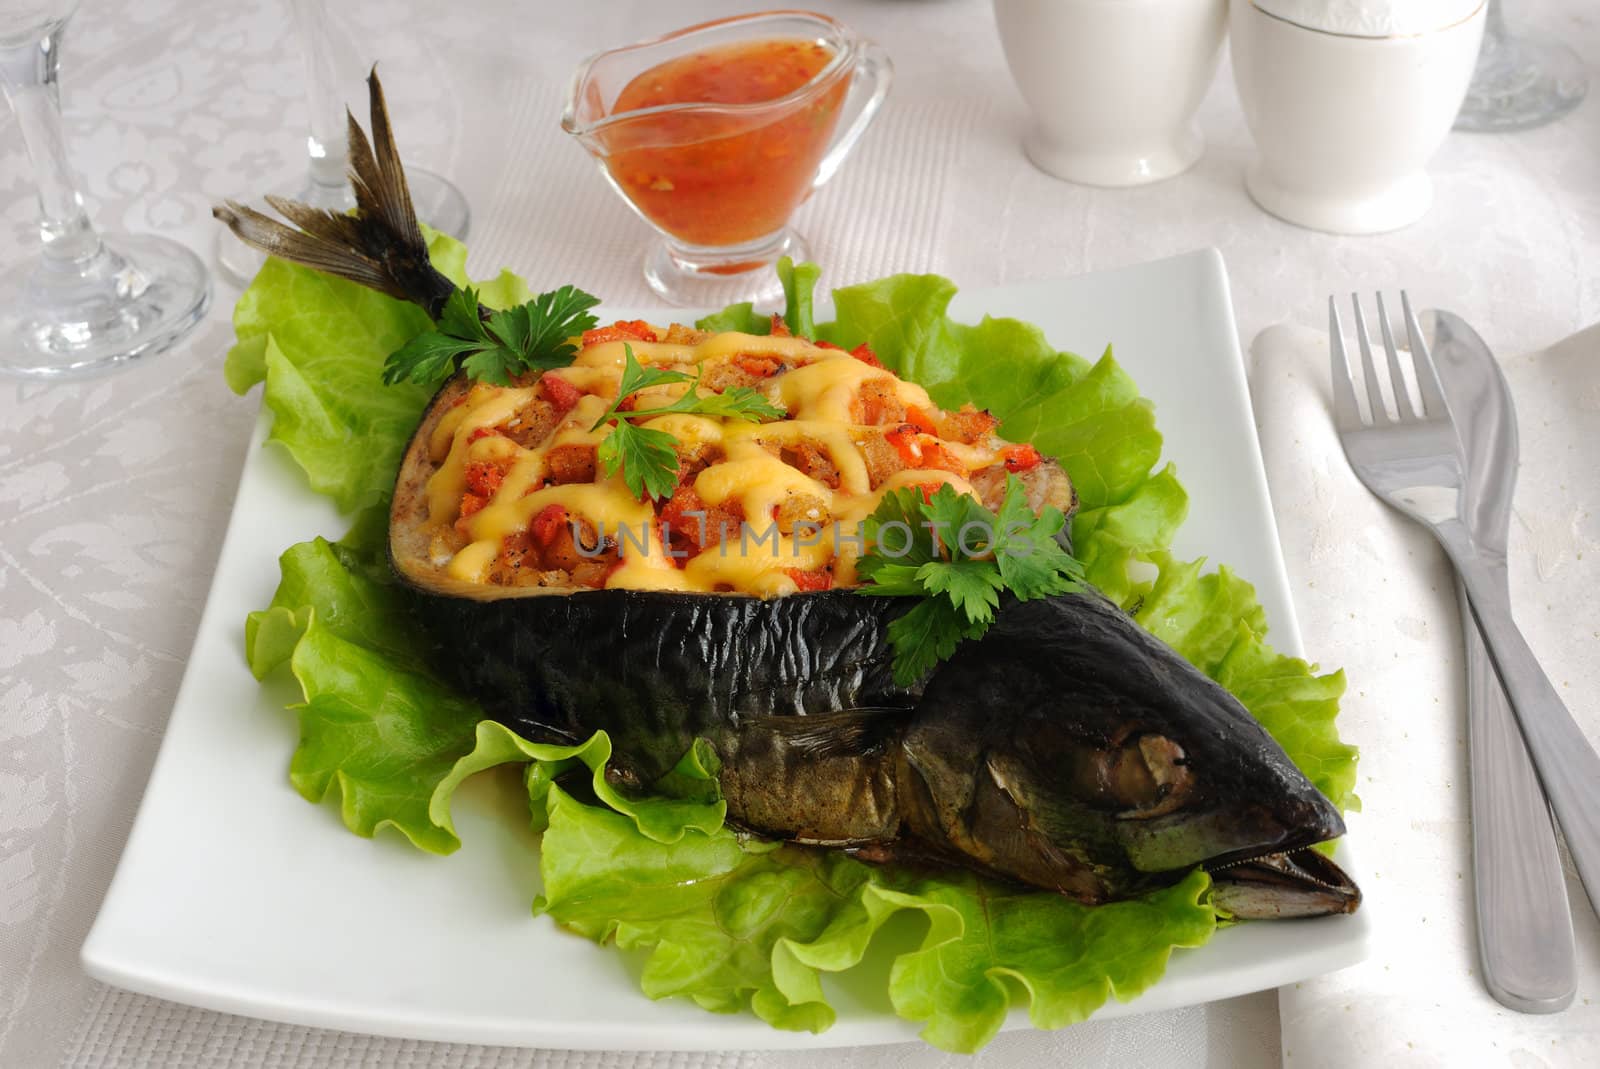 Mackerel stuffed with vegetables and cheese by Apolonia